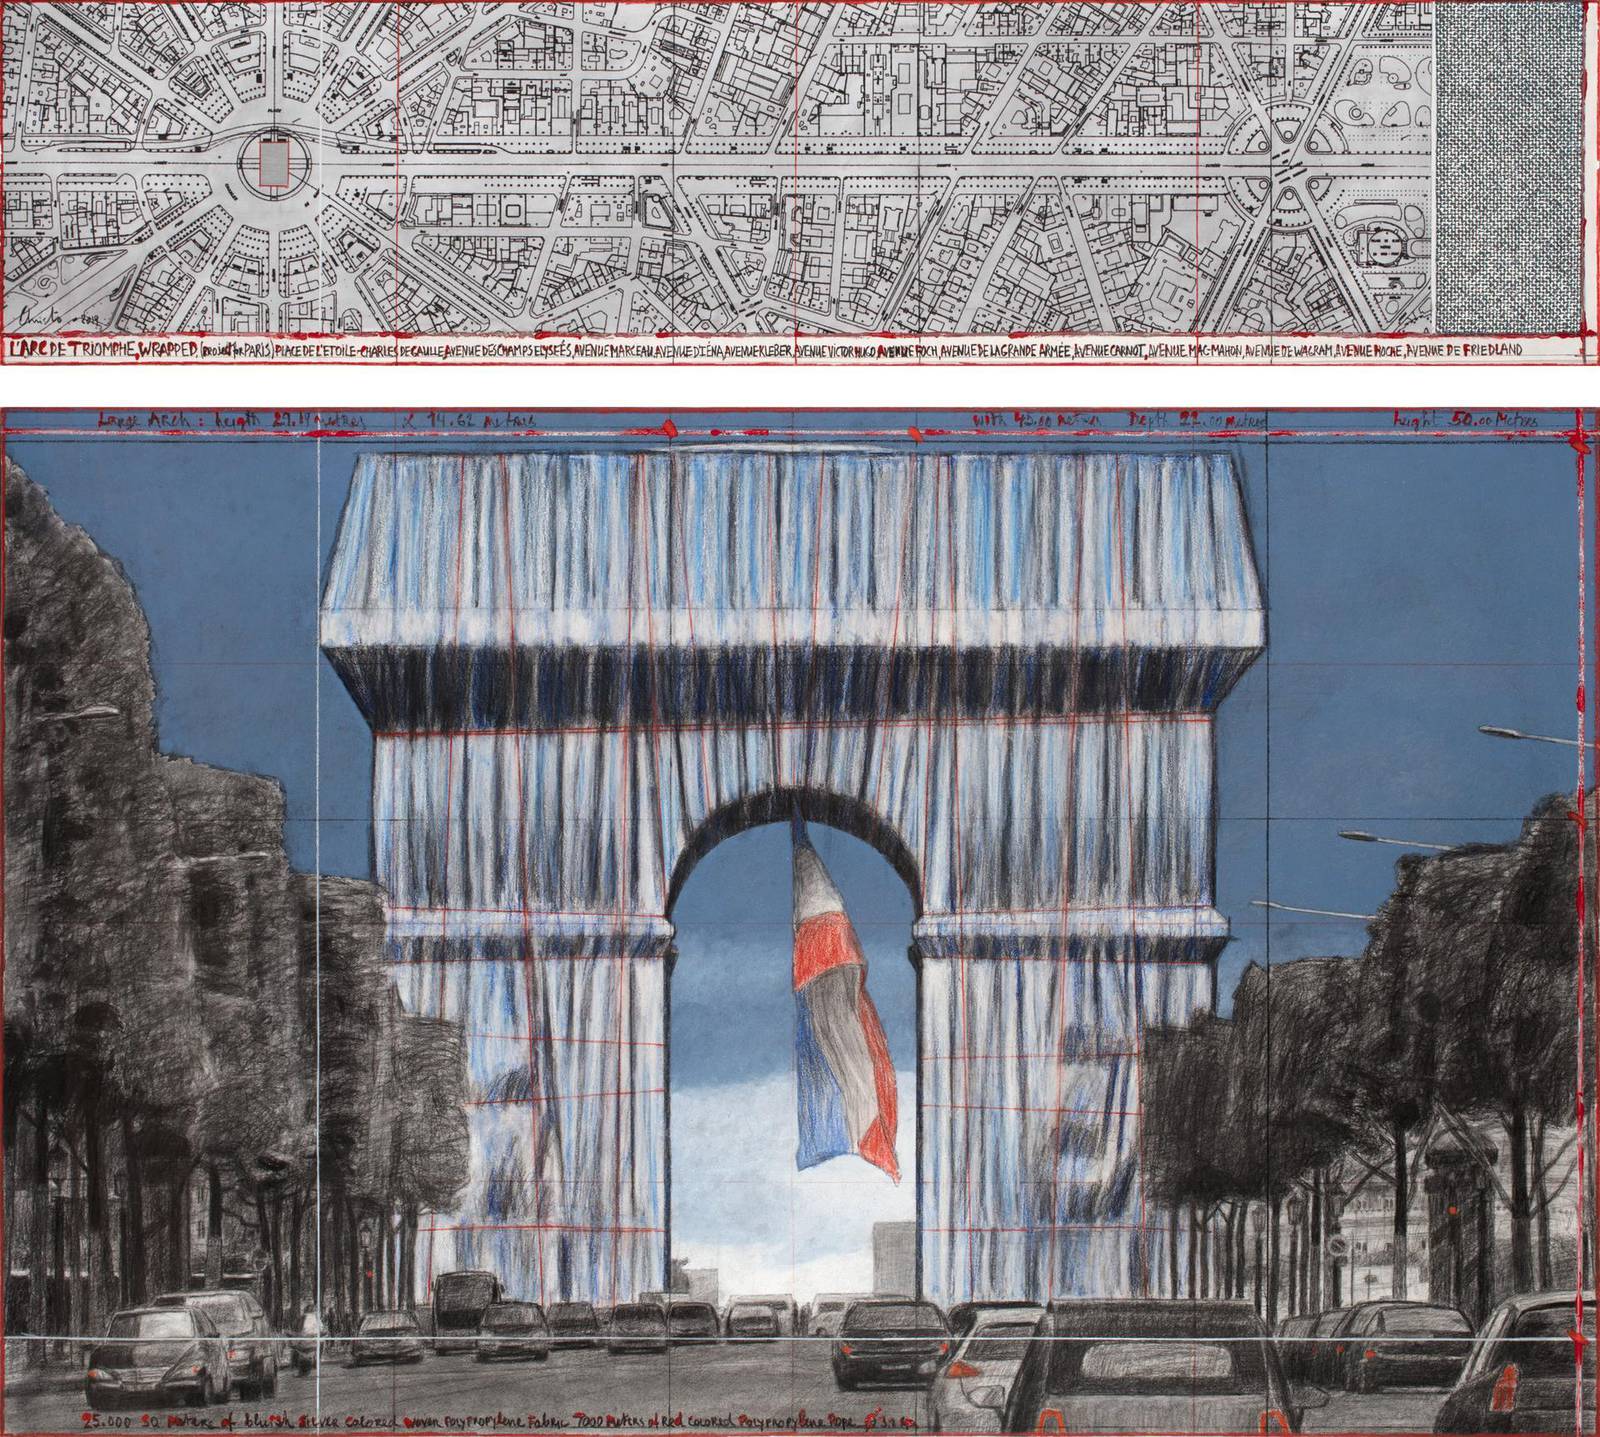 L'Arc de Triomphe in Paris to be wrapped in fabric to honour late